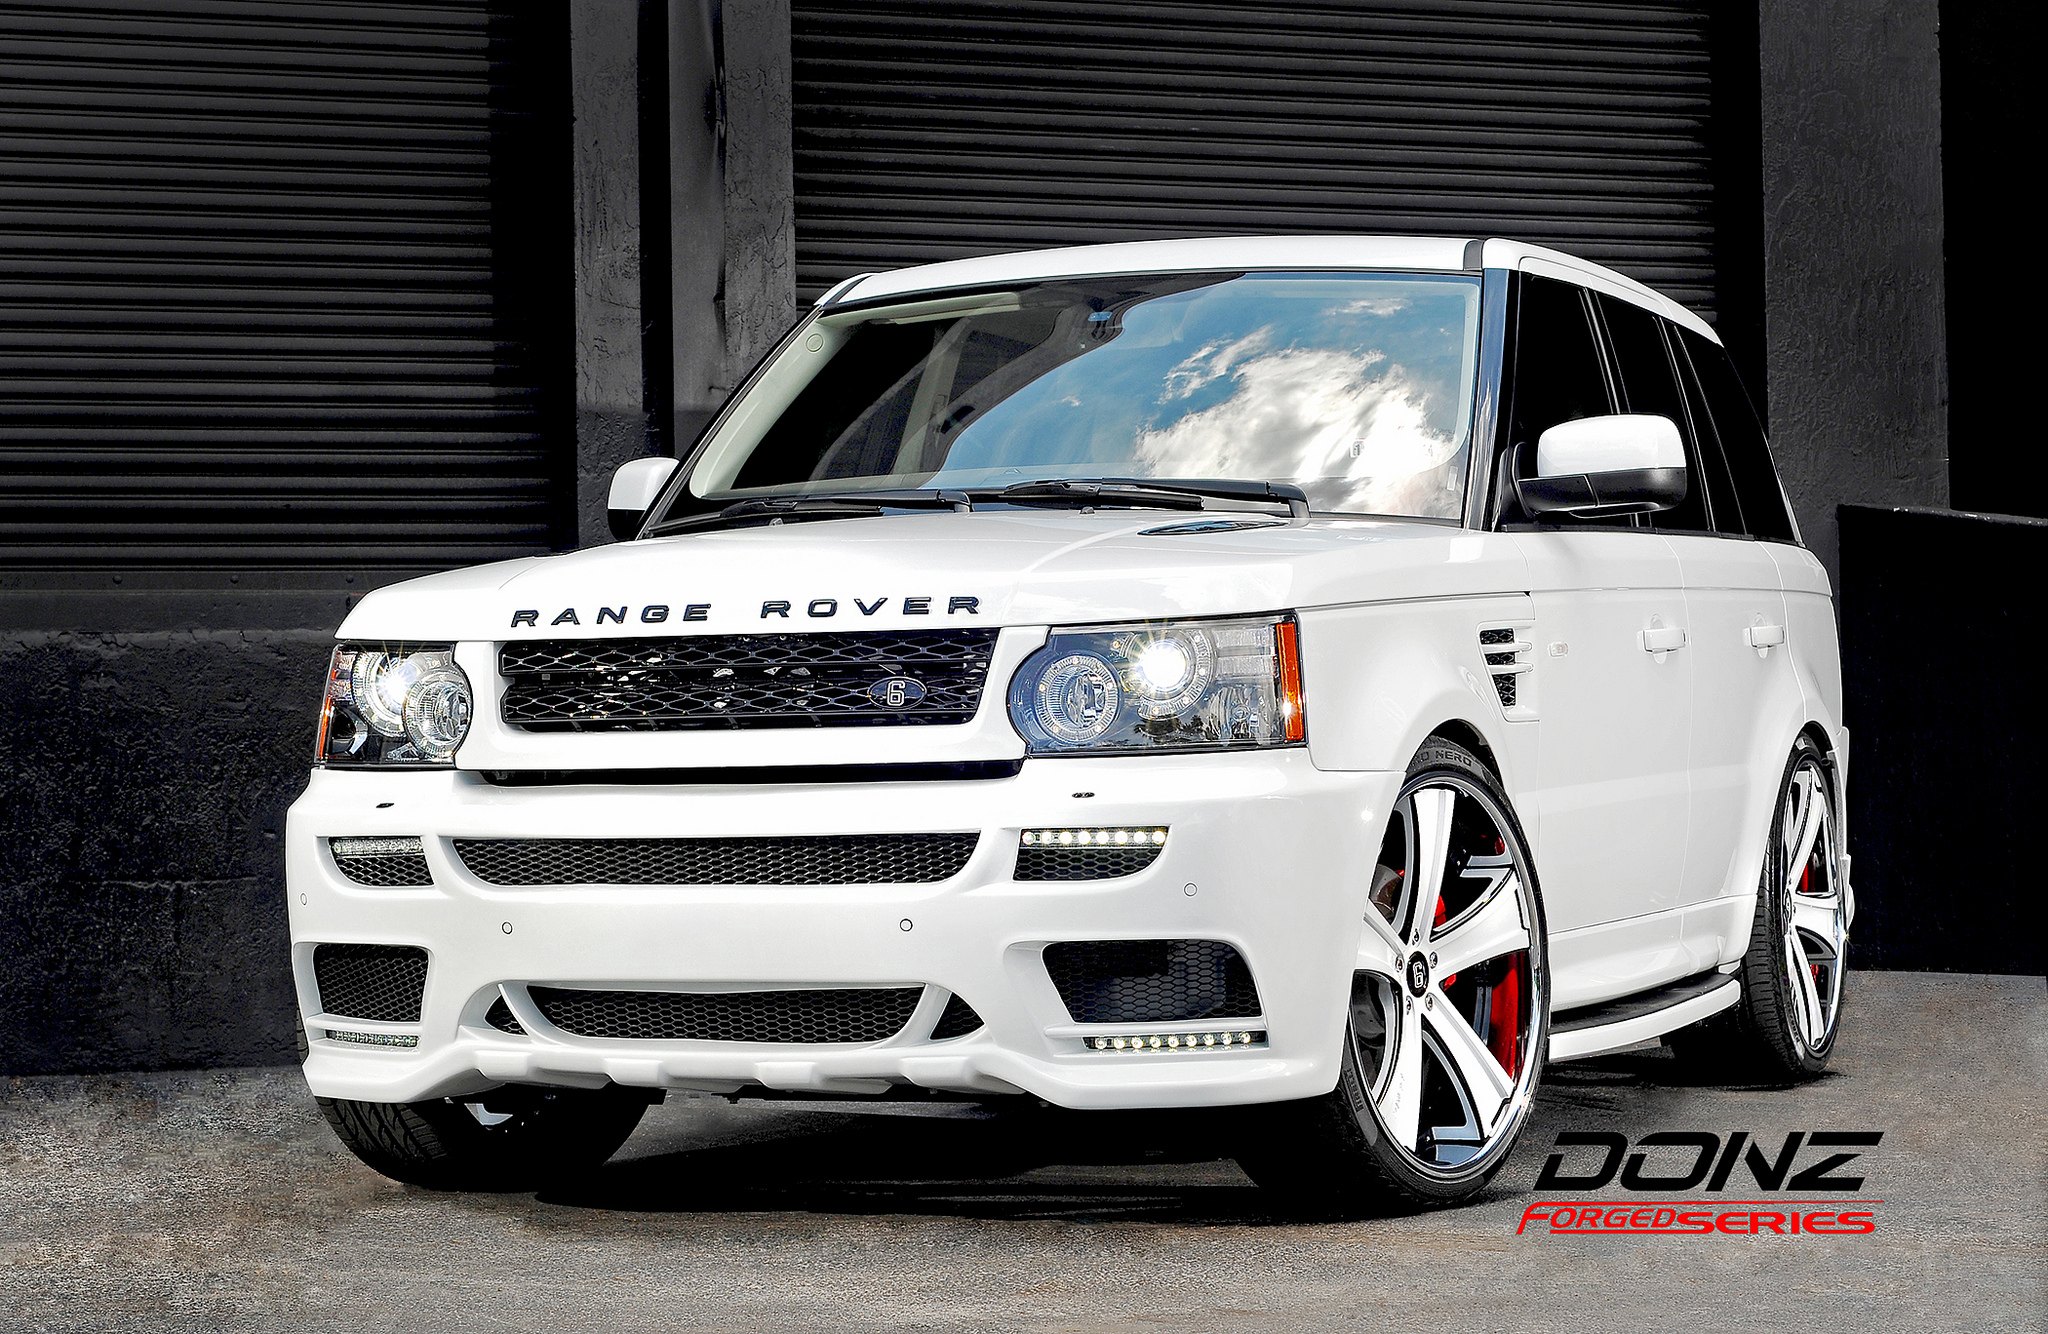 Front Bumper with Fog Lights on White Range Rover Sport - Photo by Rennen International